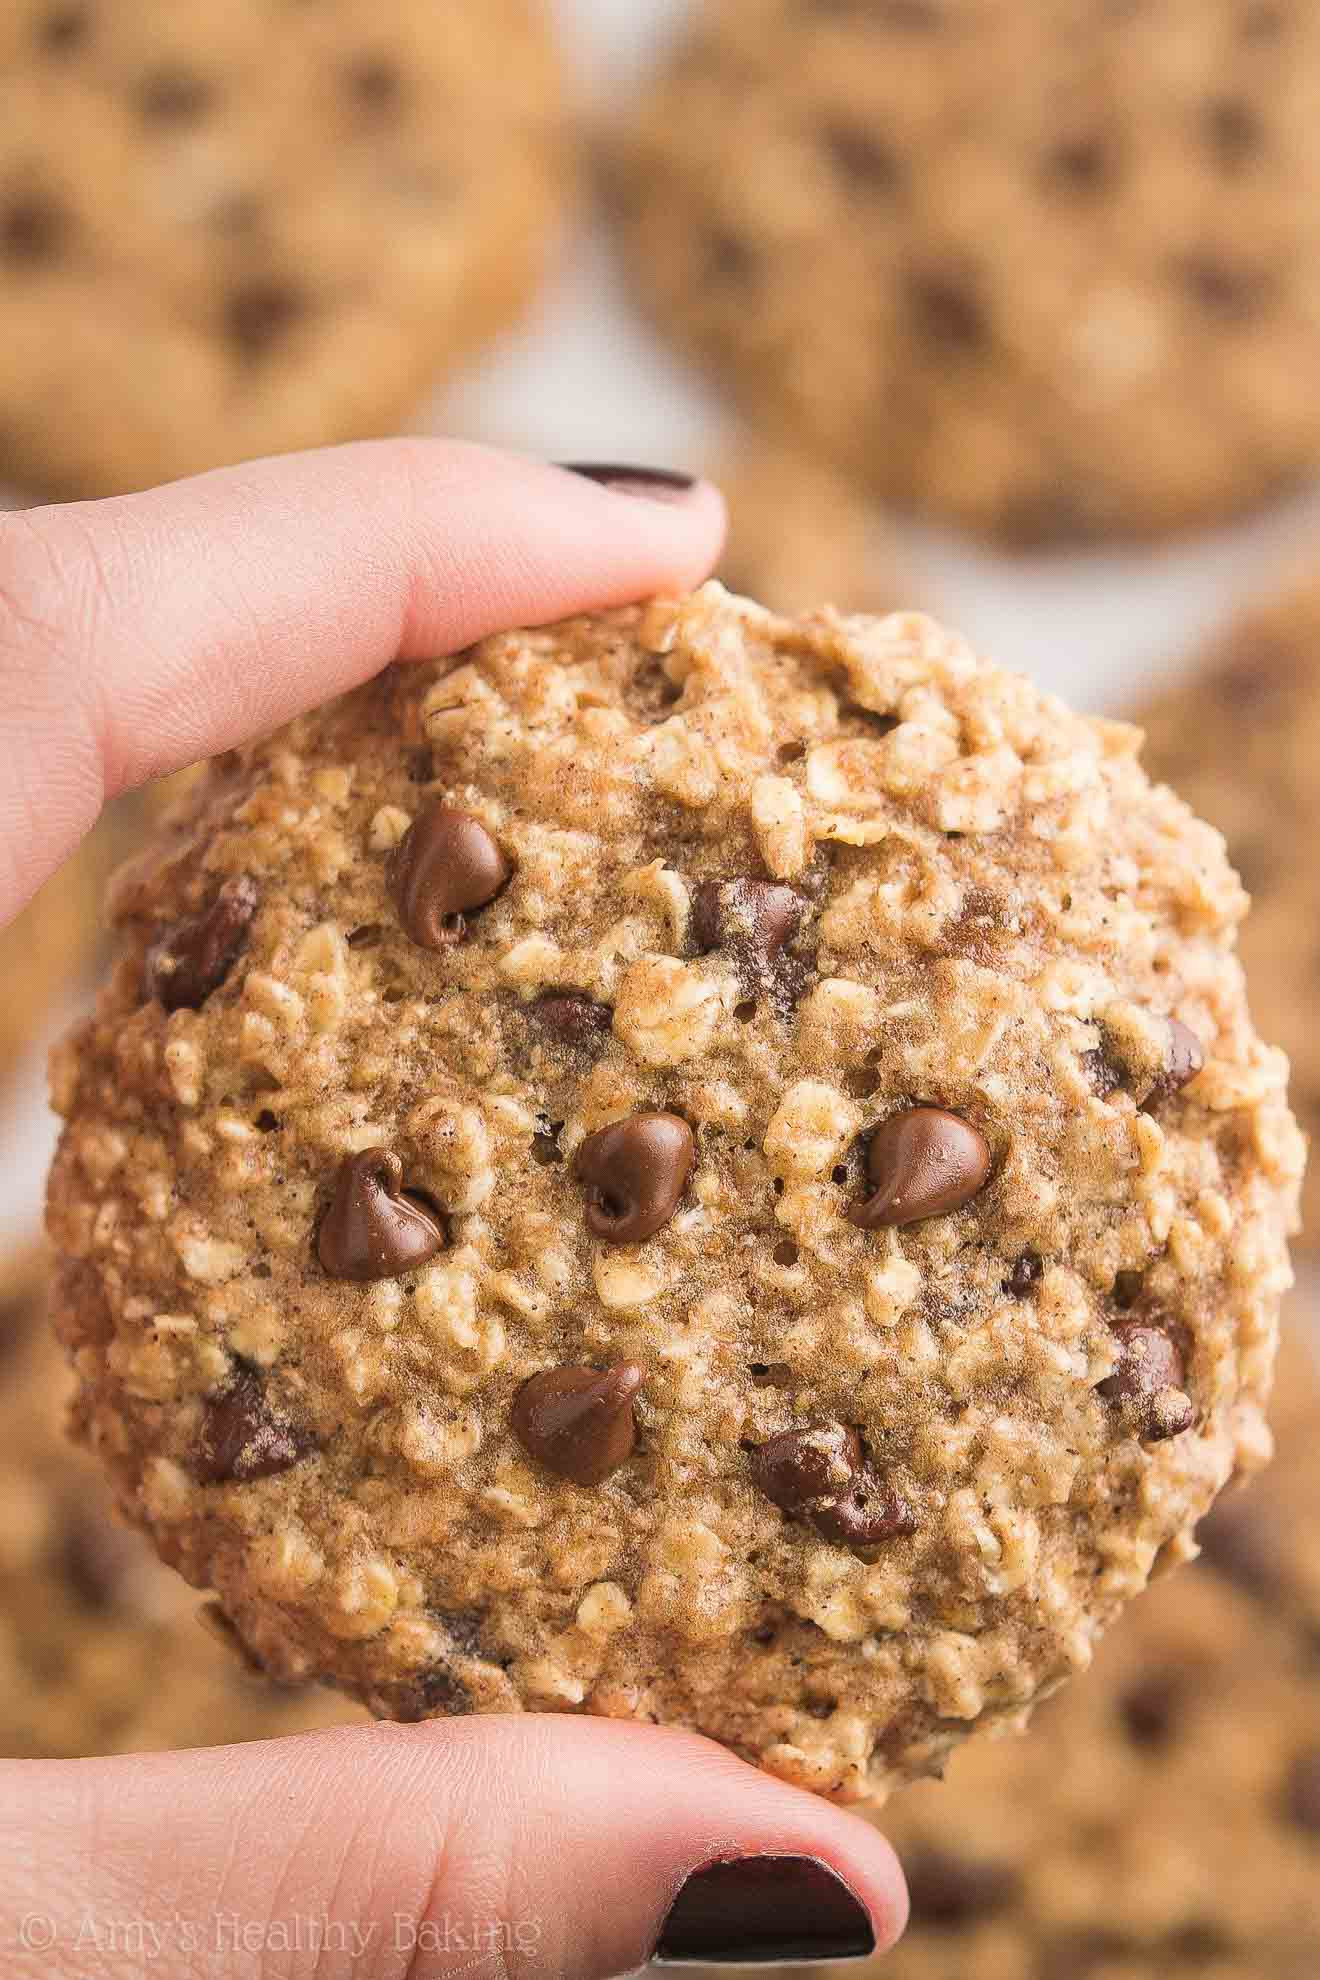 Chocolate Chip Oatmeal Cookies Healthy
 Healthy Caramel Chocolate Chip Oatmeal Cookies